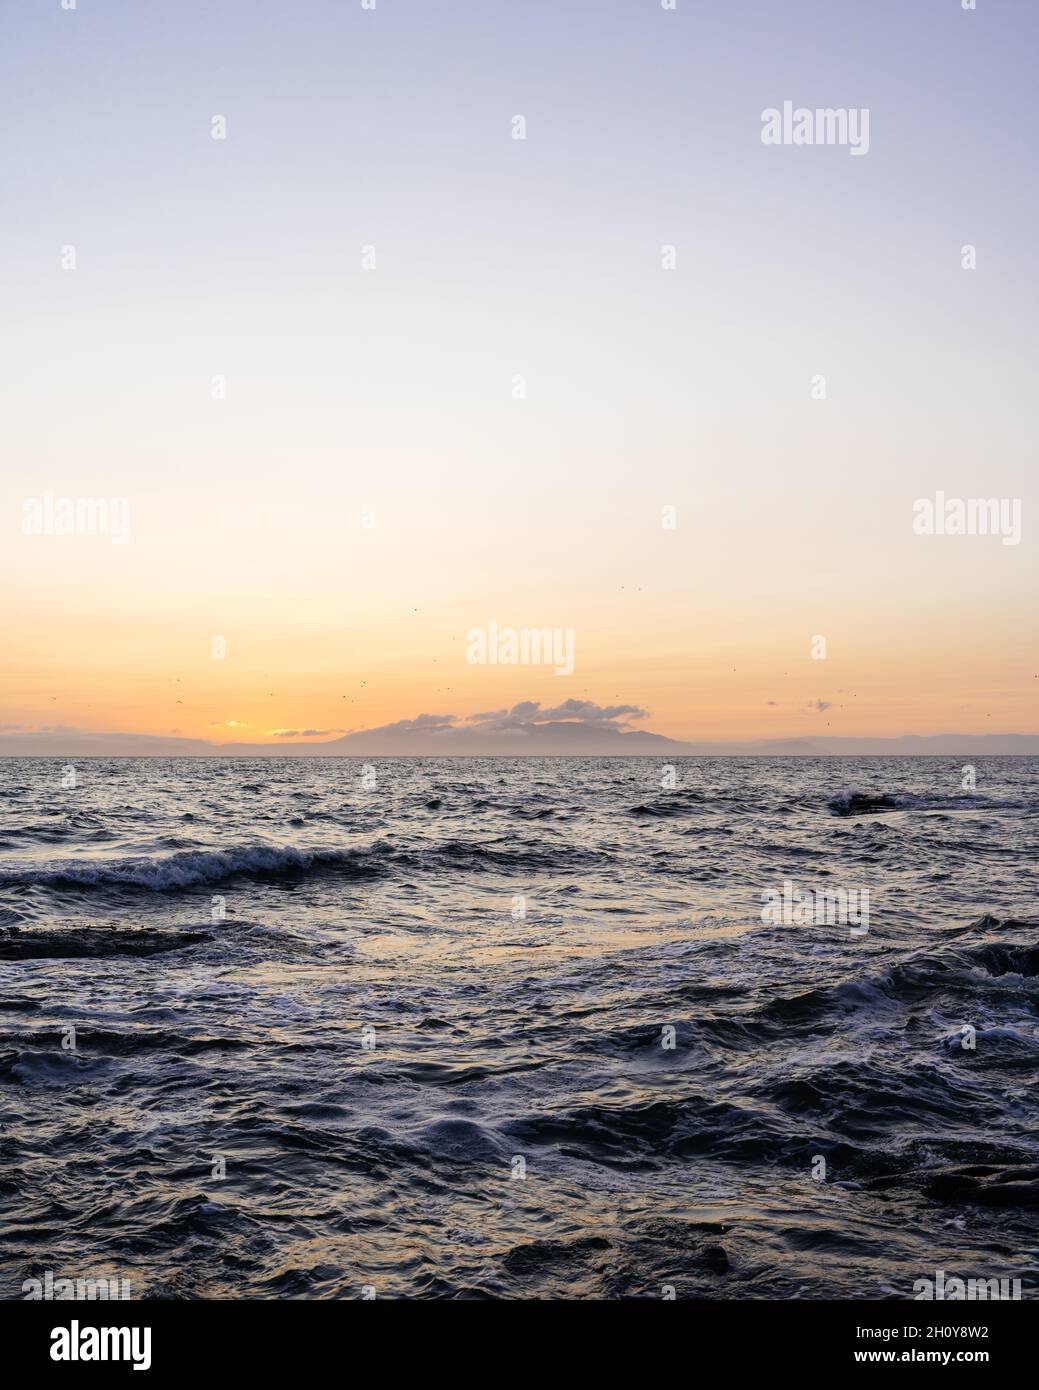 View at sunset of the Scottish Island of Arran across the sea from Troon at with the Goatfell mountain range on the horizon lit by the setting sun. Stock Photo